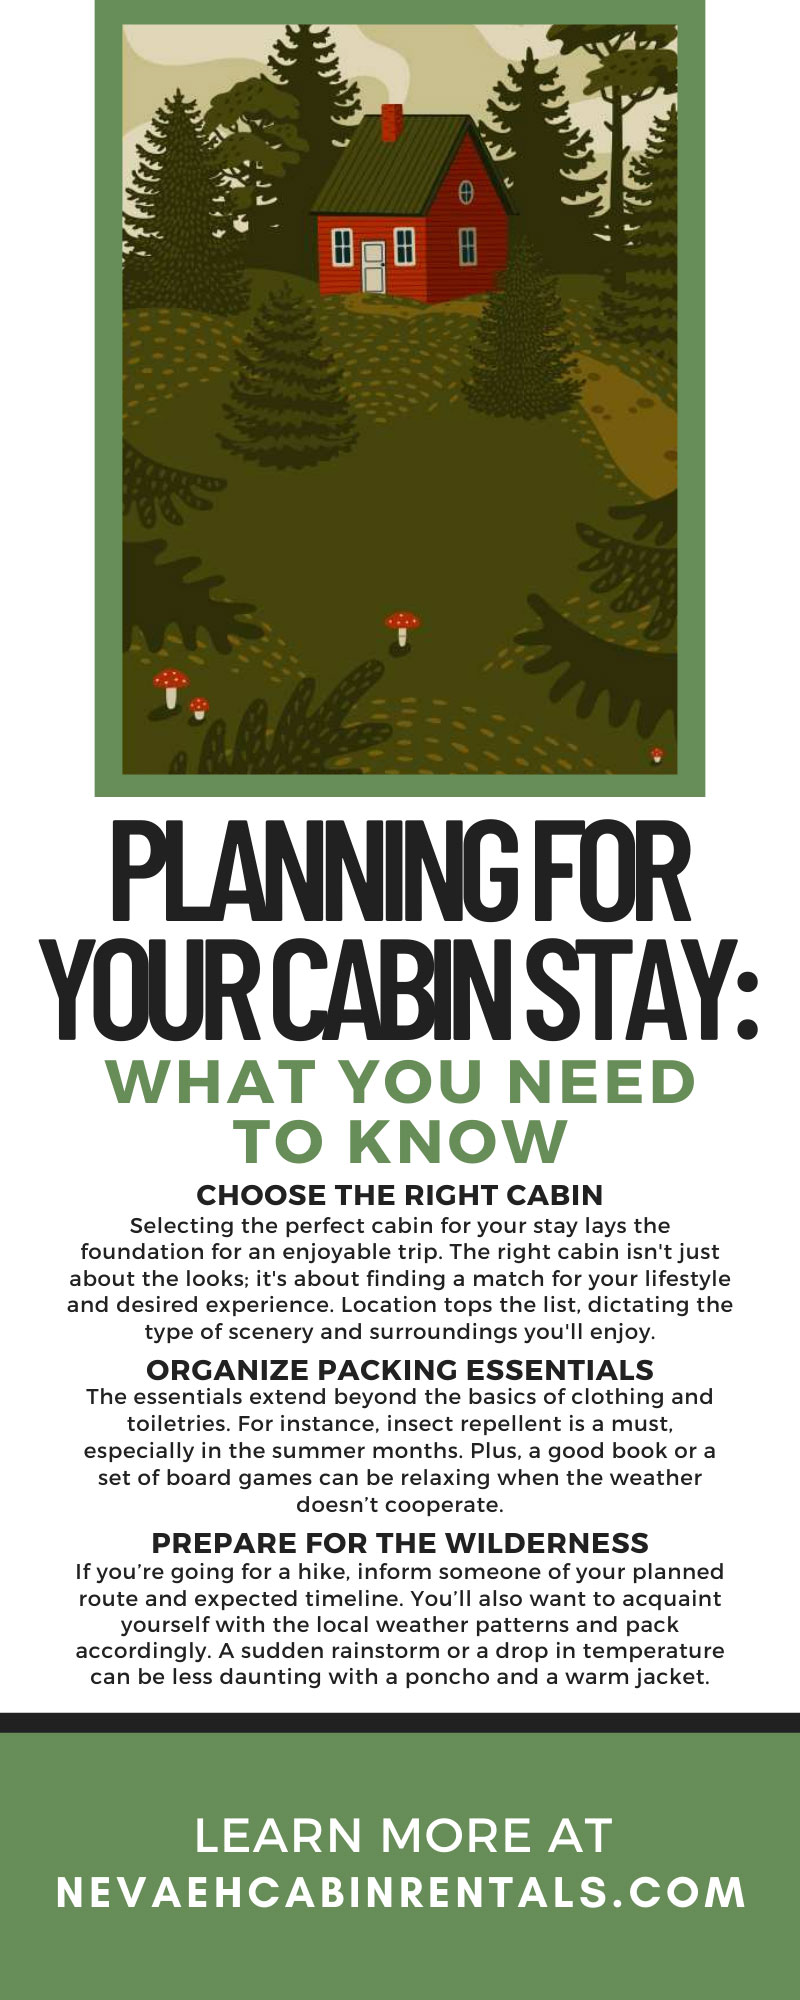 Planning for Your Cabin Stay: What You Need To Know